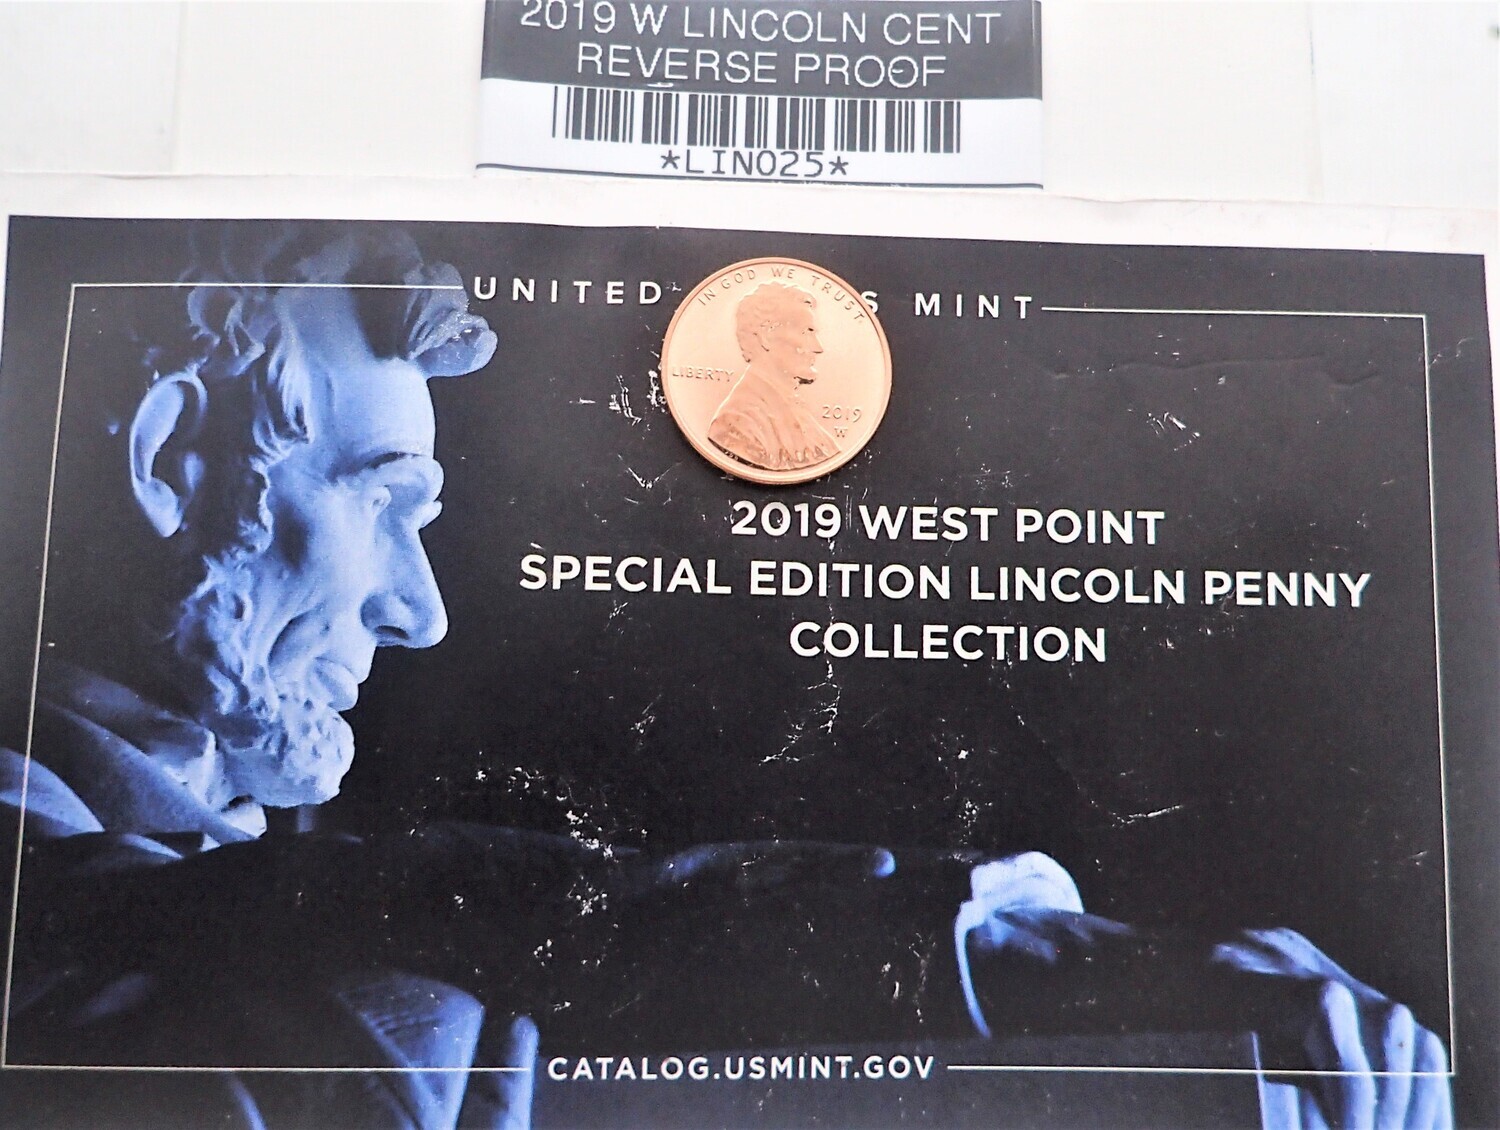 2019 W 2019 W SPECIAL EDITION LINCOLN CENT (REV PROOF) LIN025